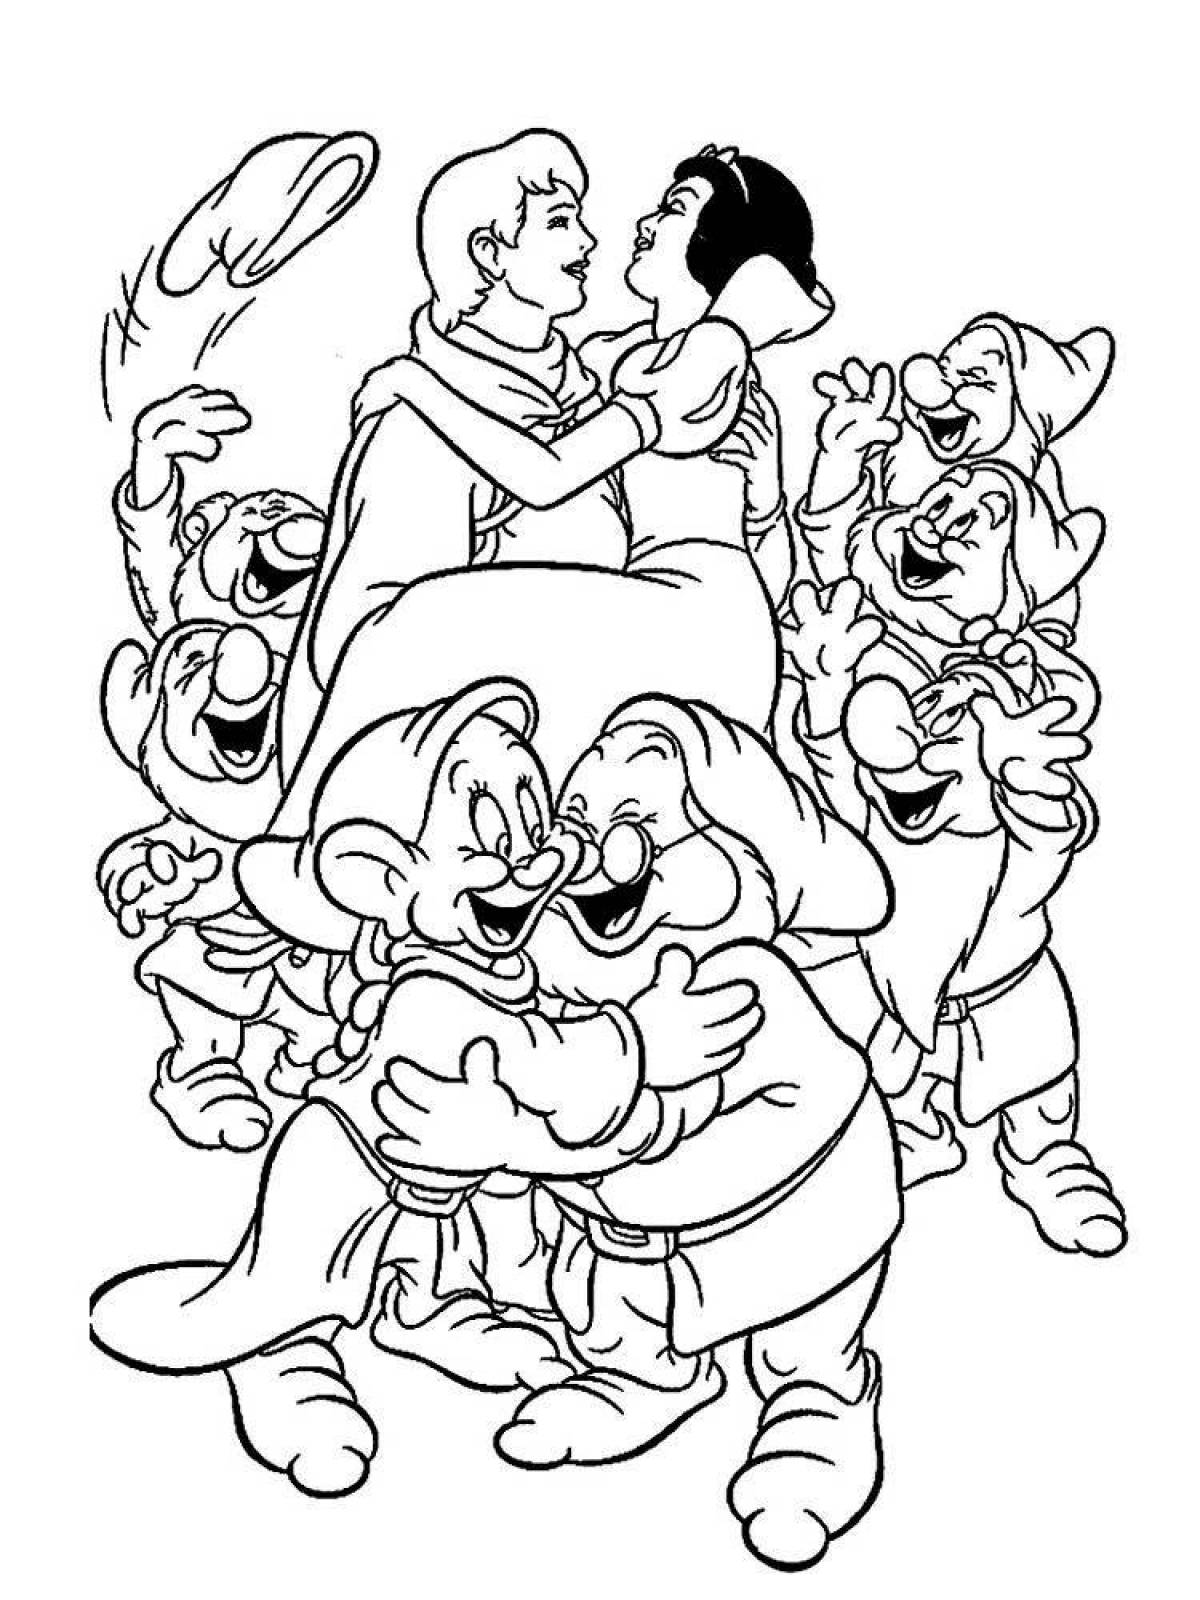 Exquisite snow white and 7 dwarfs coloring book